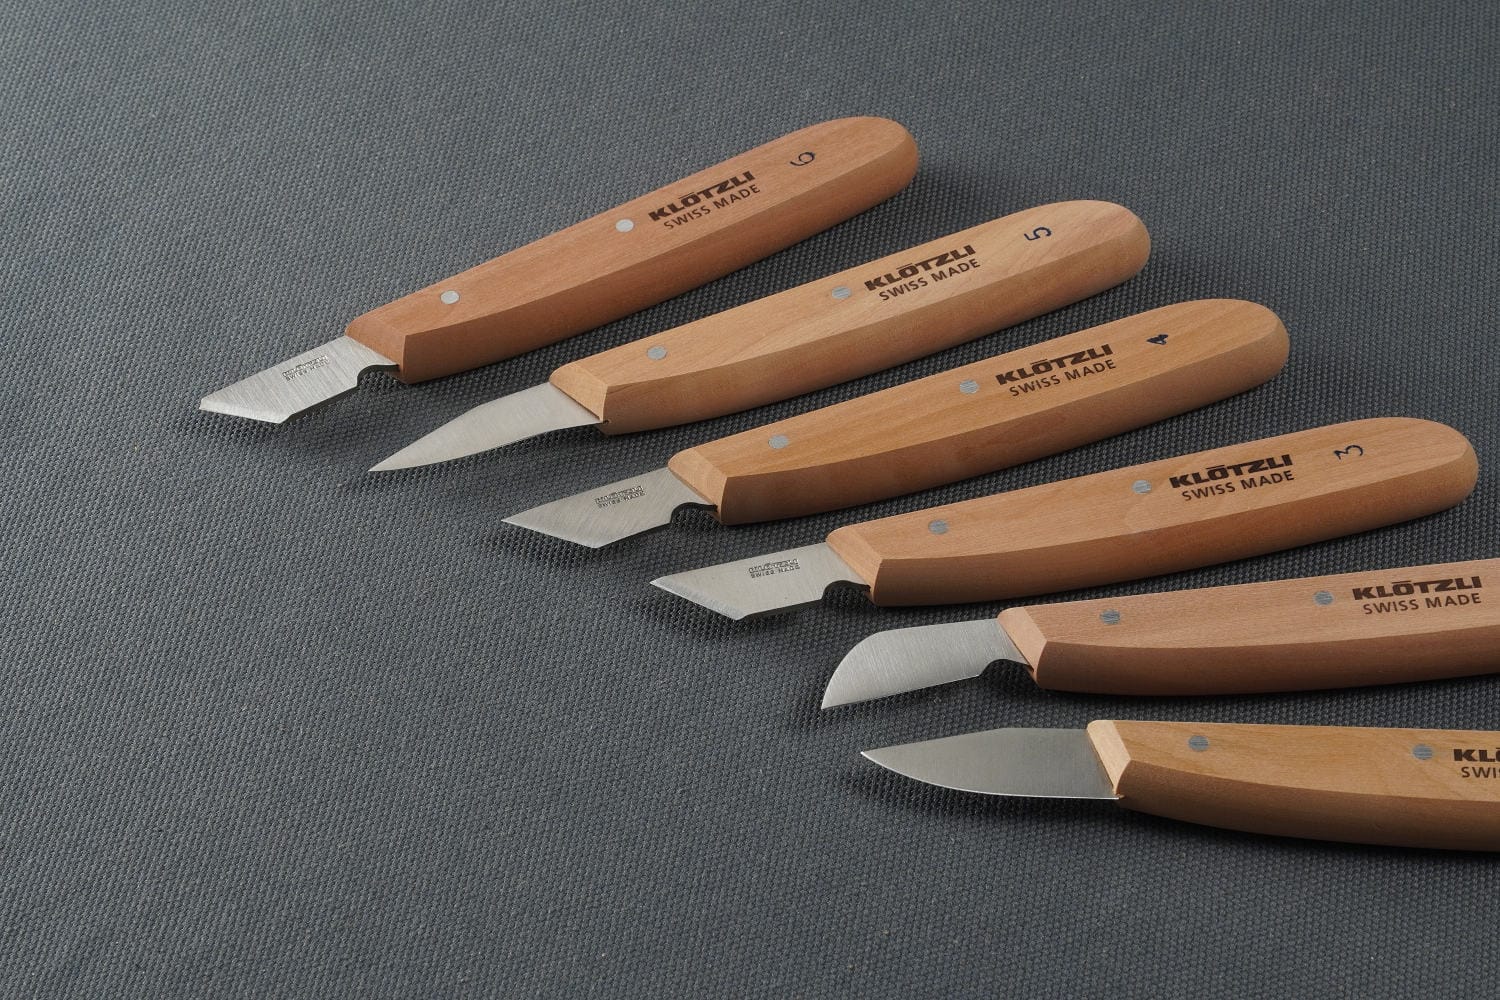 Chip carving knives set - Swiss chip carving knives set - The Spoon Crank